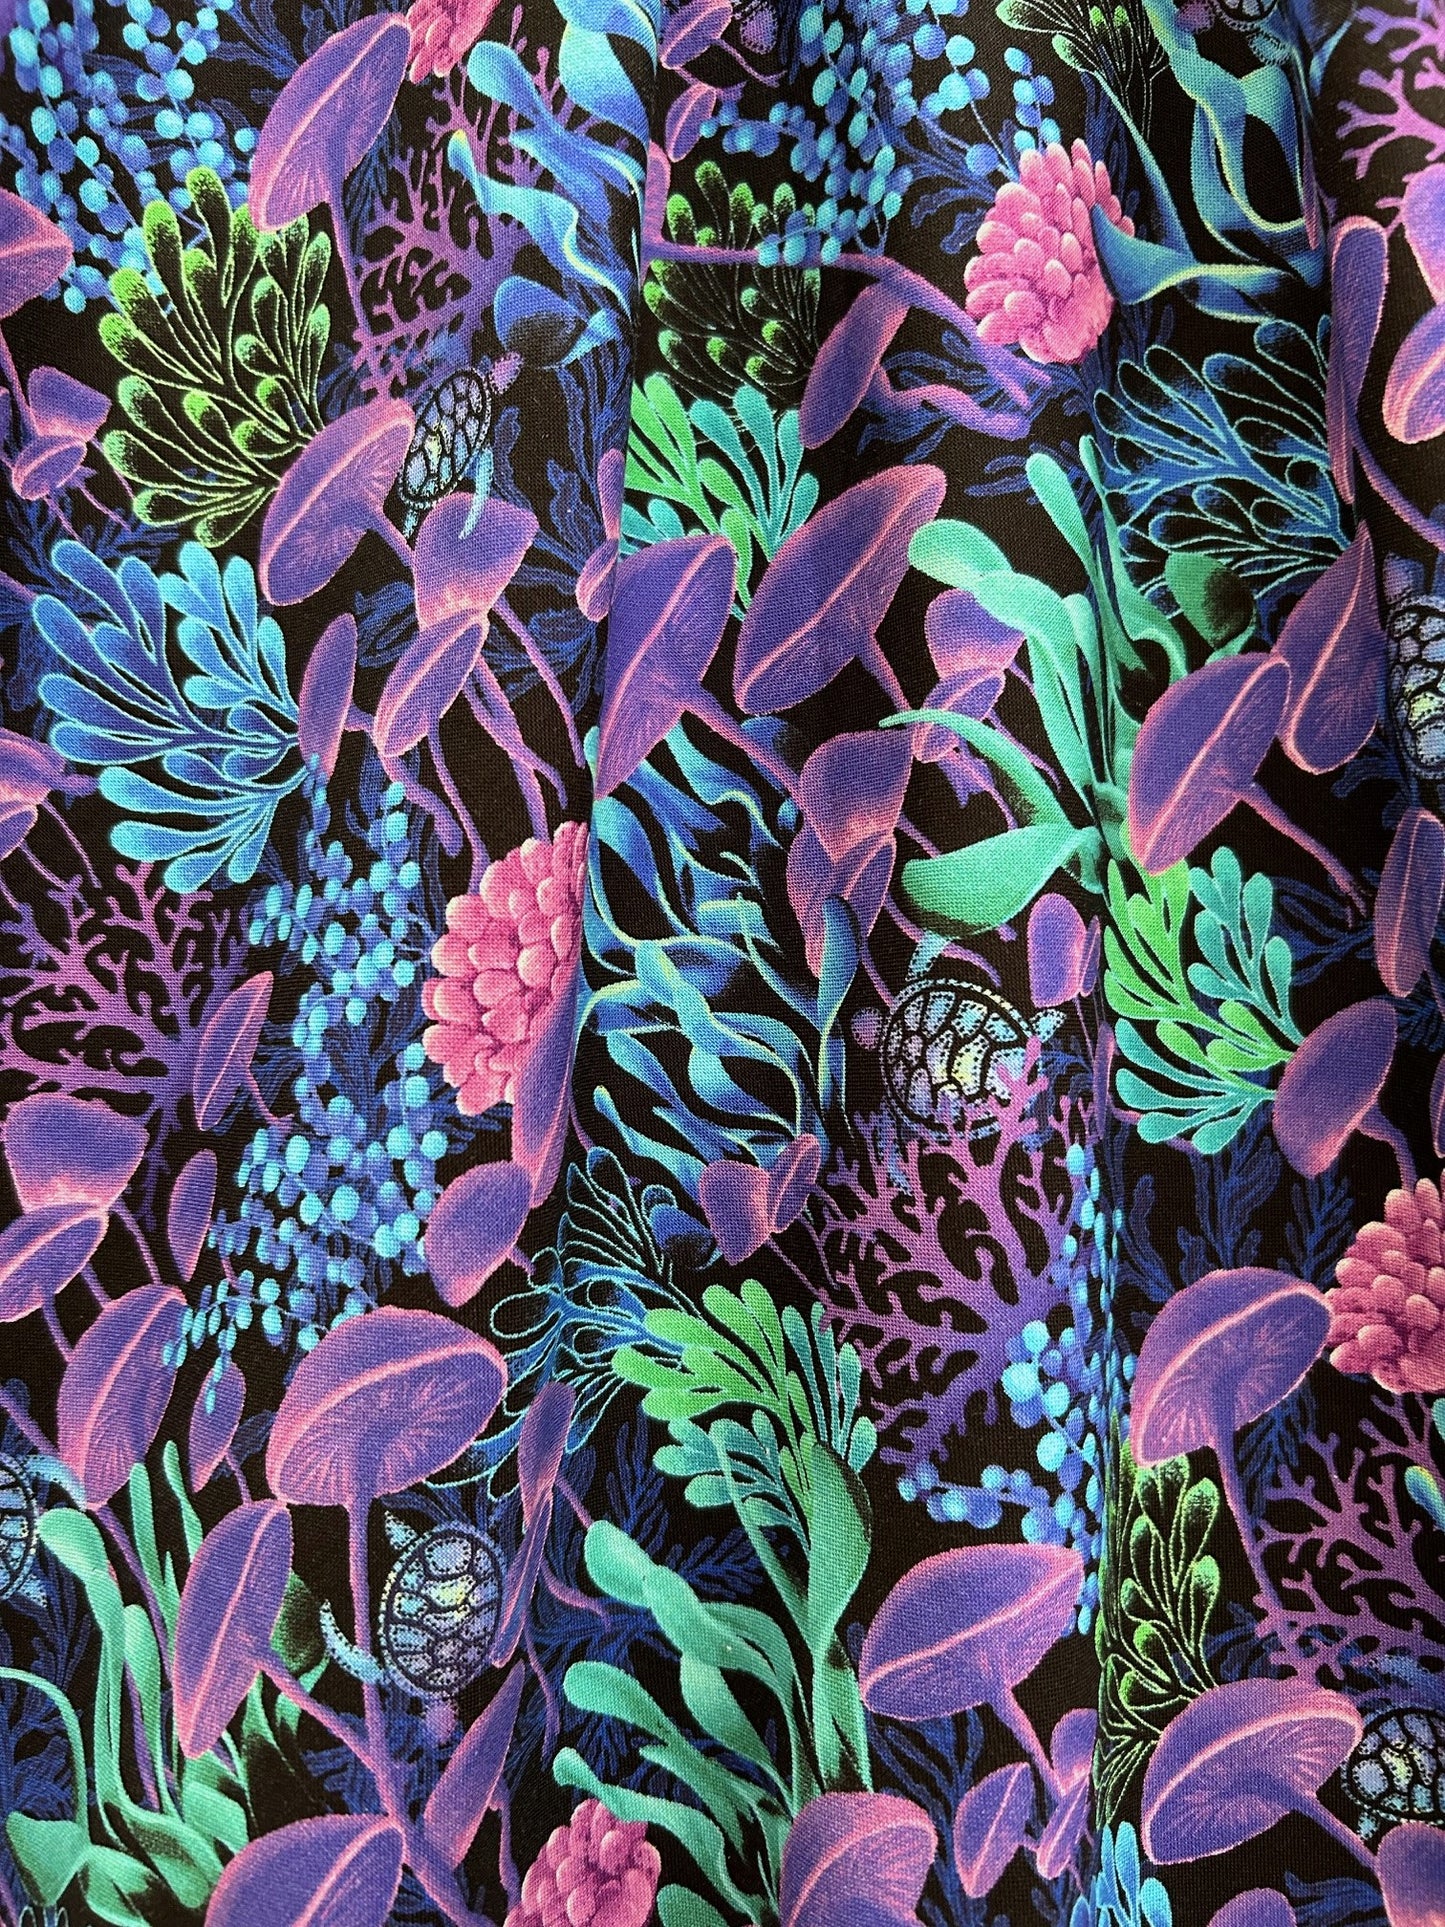 close up of the fabric showing sea life